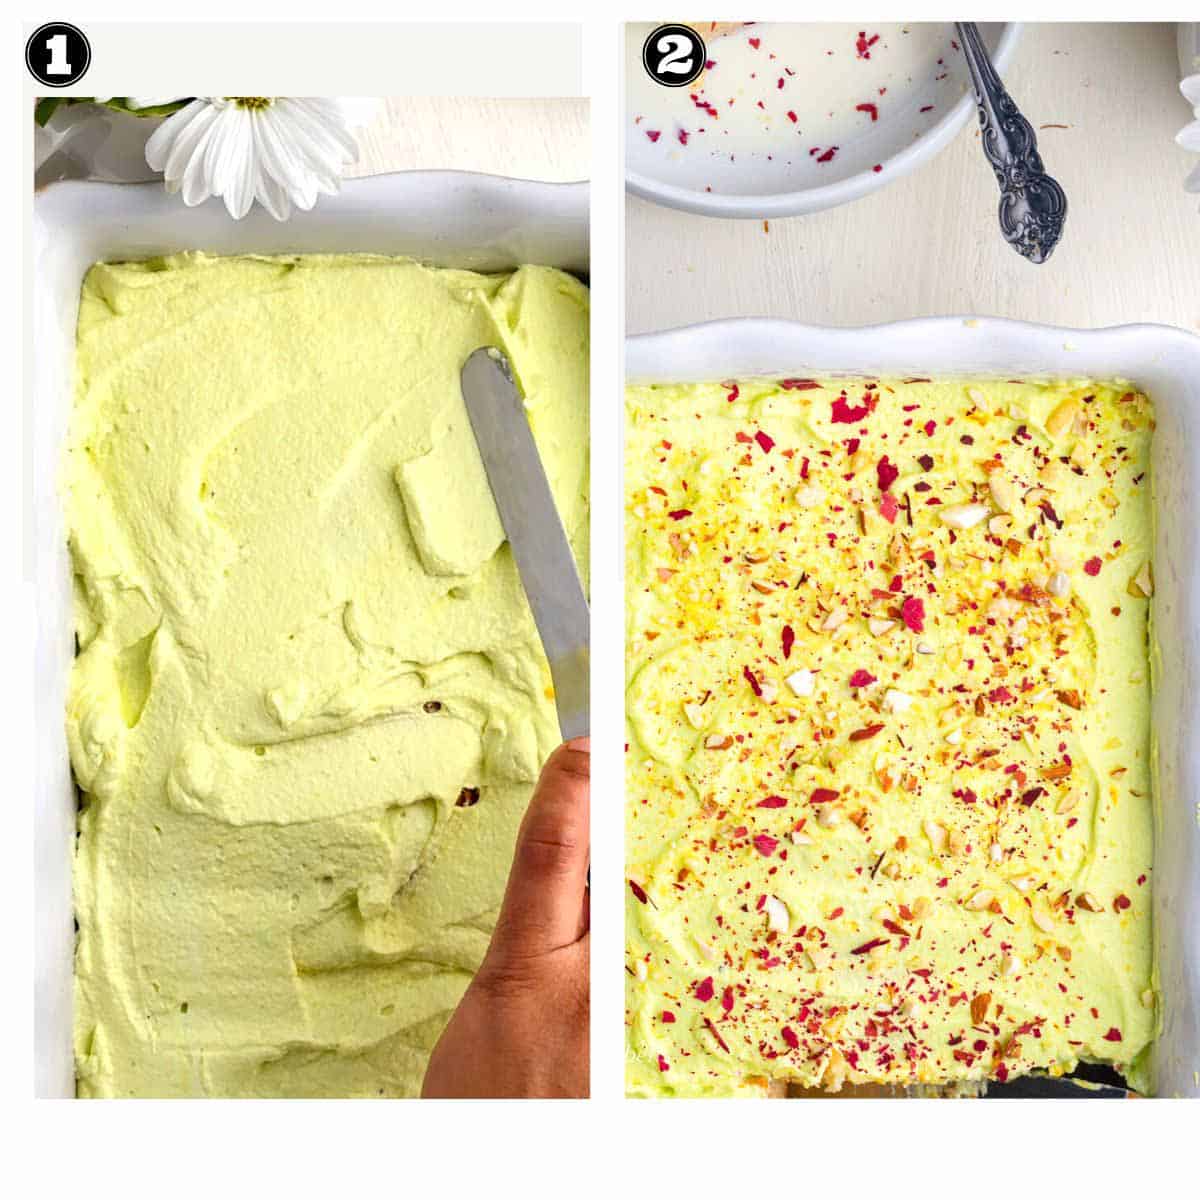 images of frosting the cake with saffron flavored whipping cream